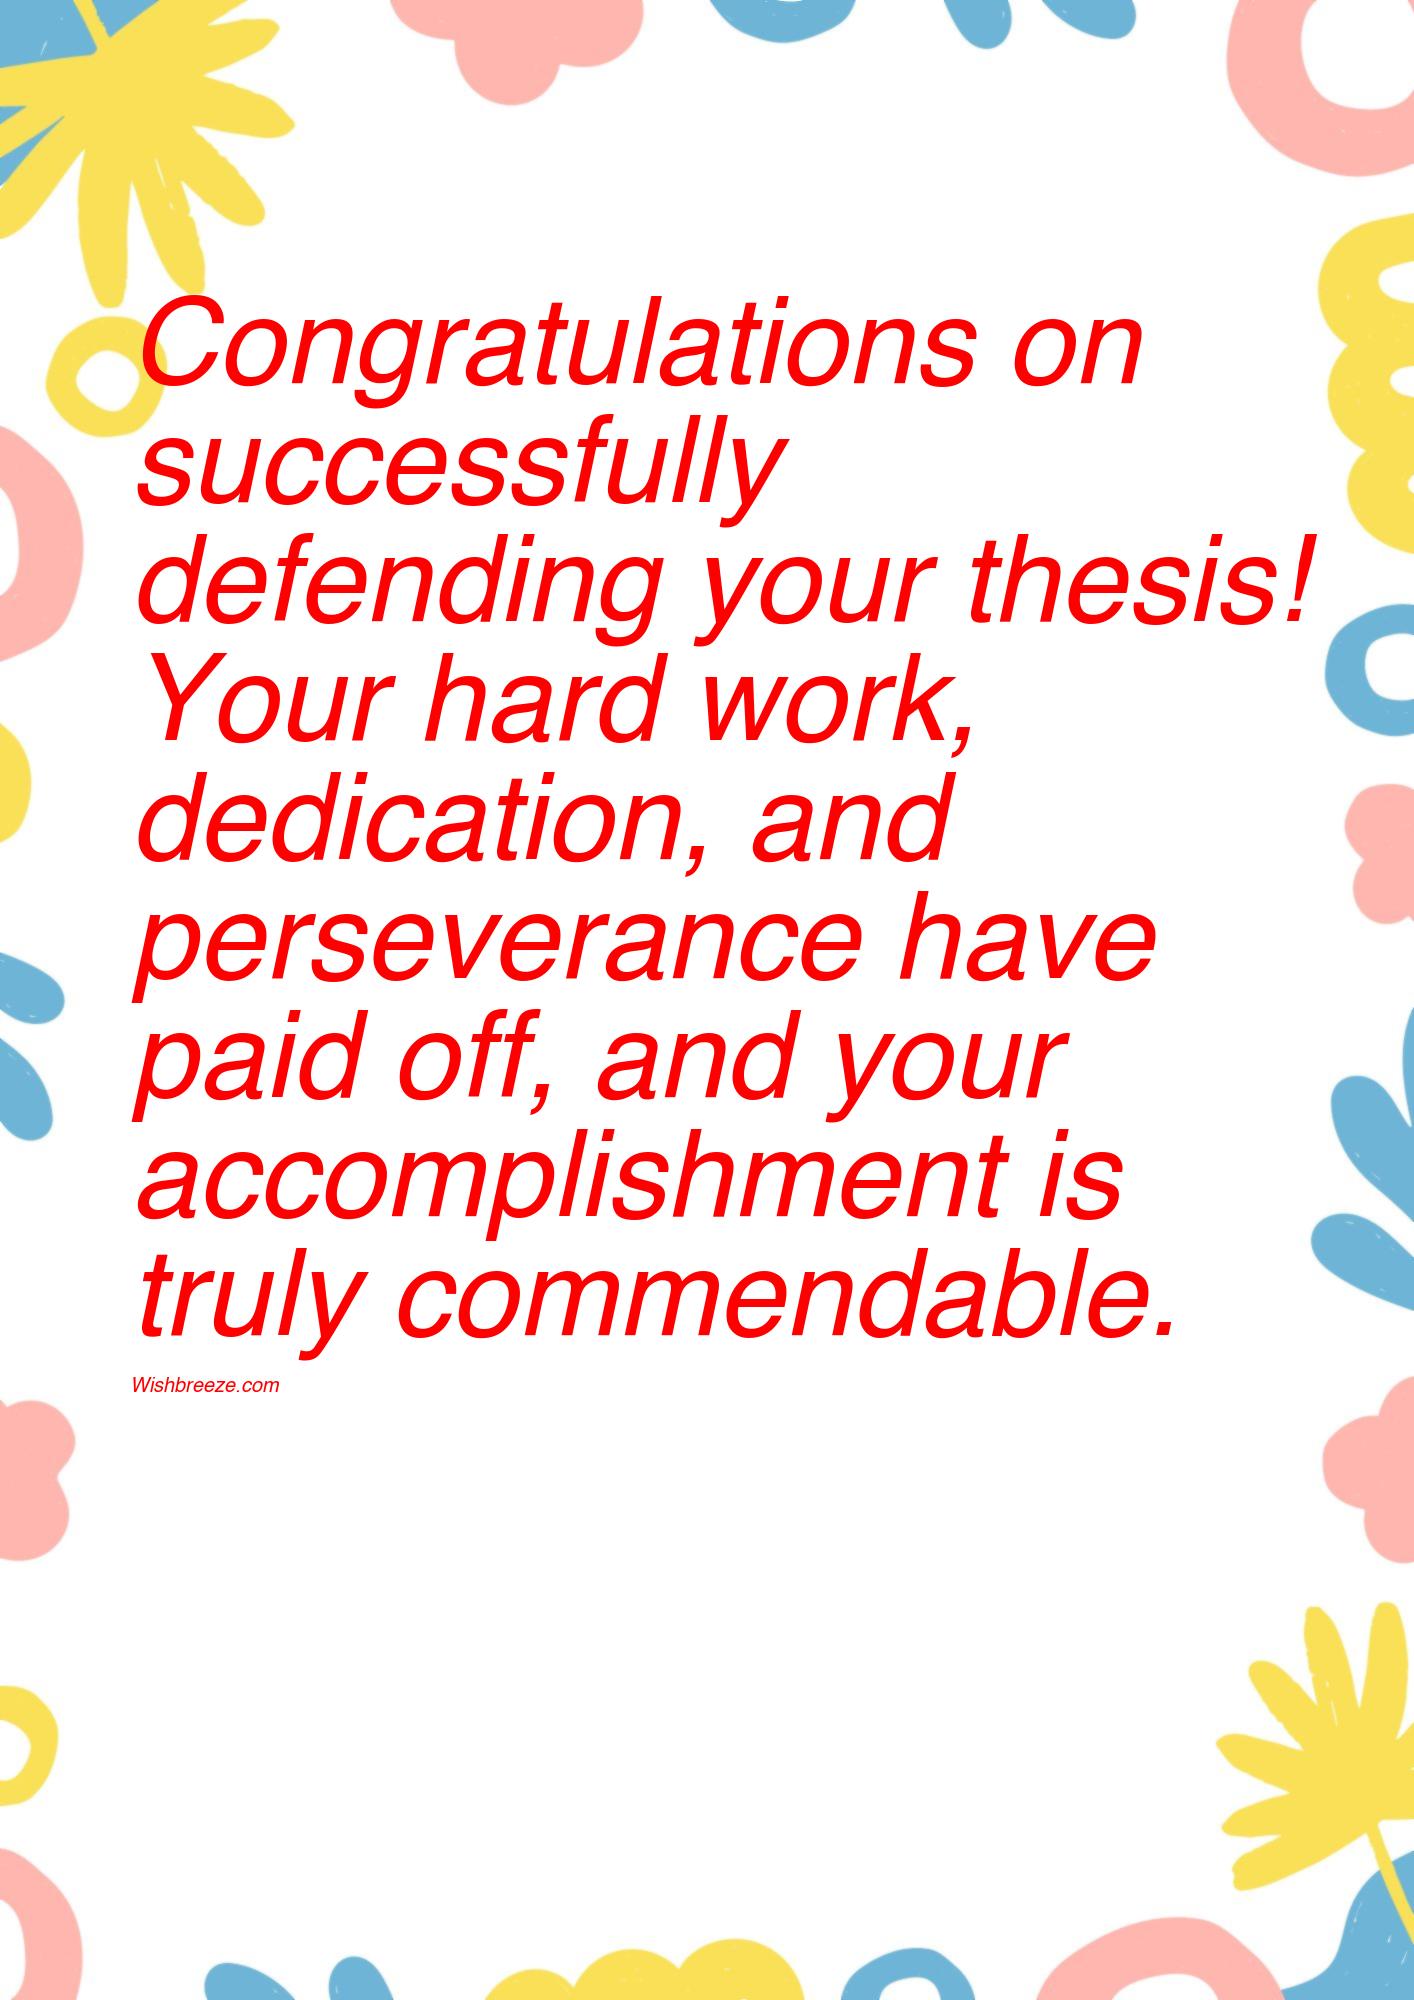 congratulations on finishing your thesis